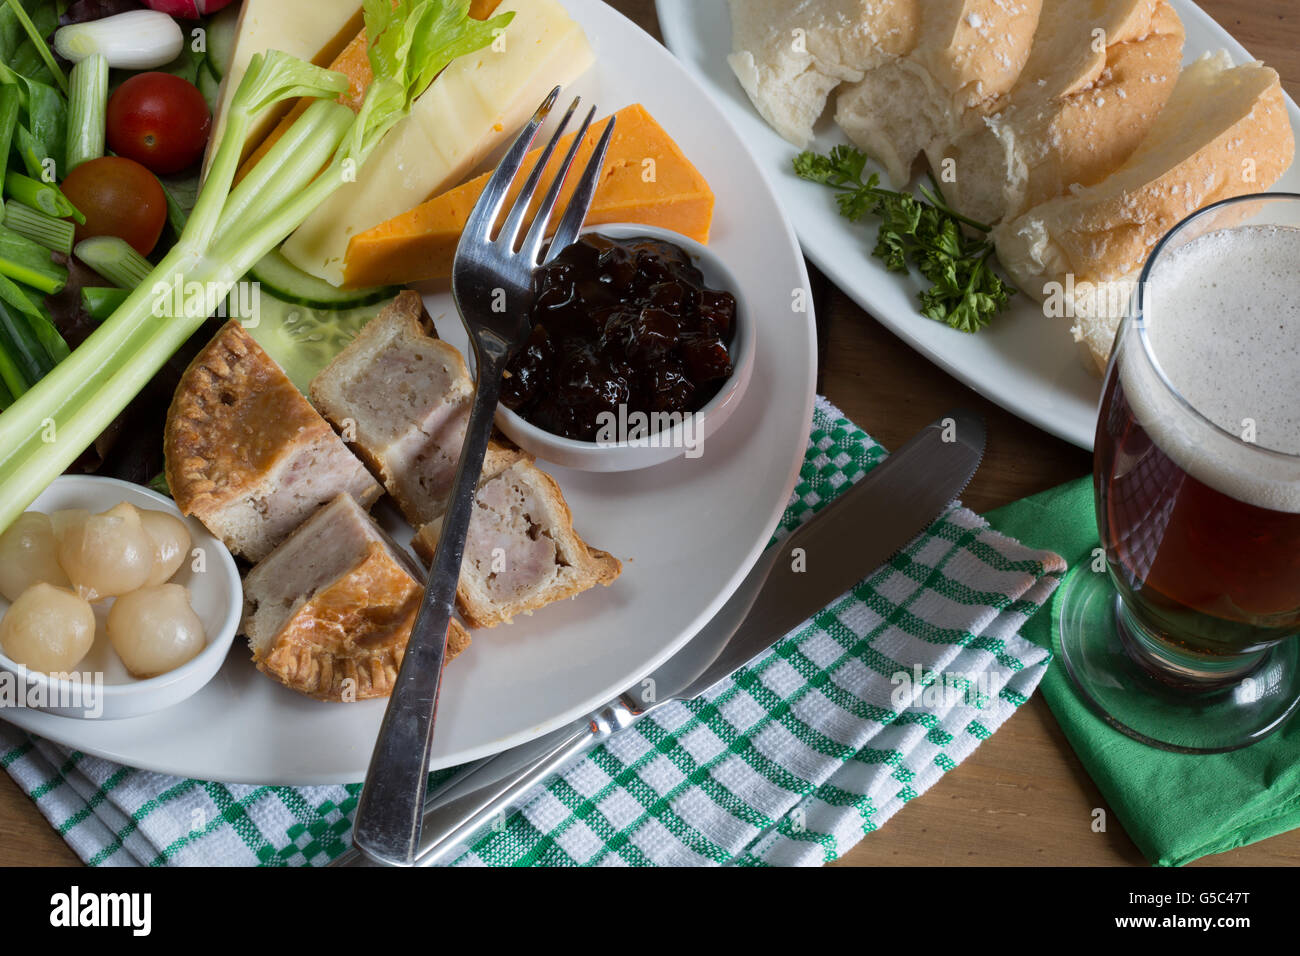 A traditionally English summer dish of Ploughman's Lunch served with fresh baked bread and a glass of beer/ale. Stock Photo